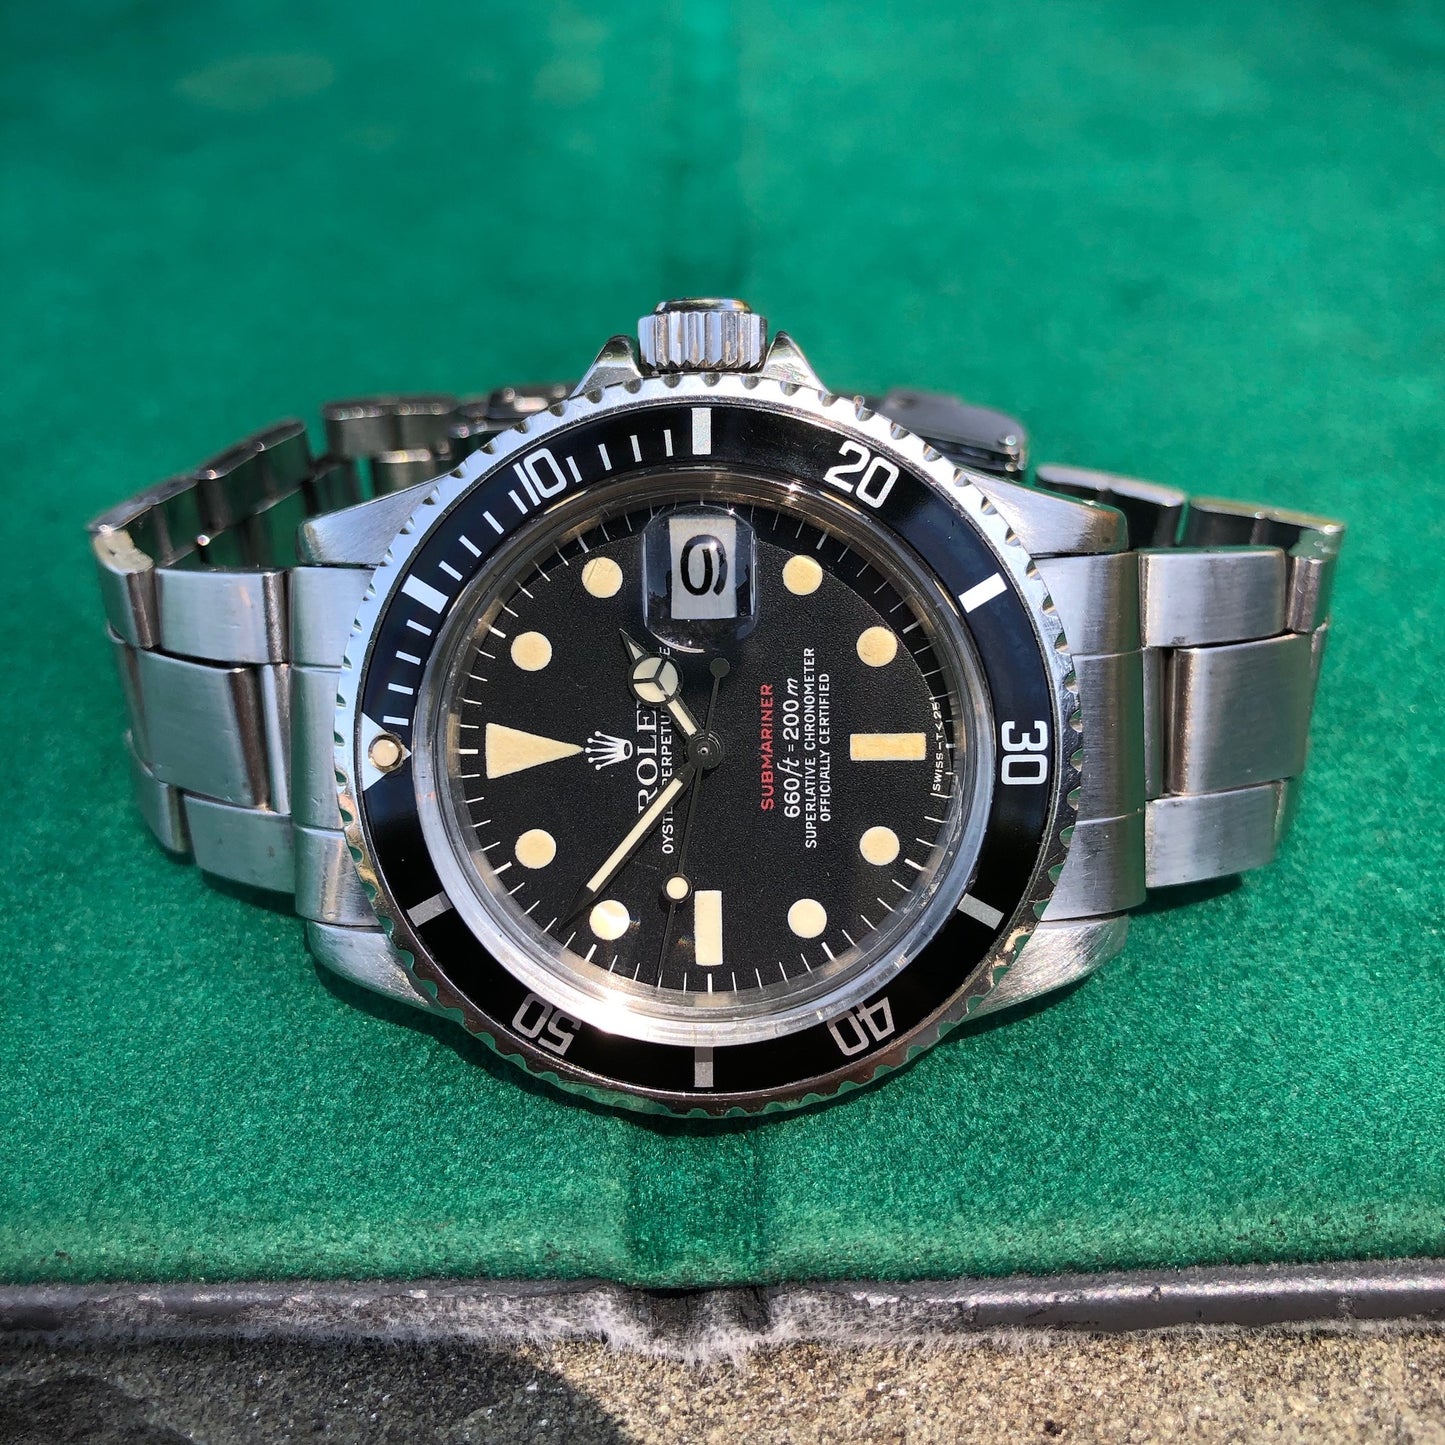 Vintage Rolex Red Submariner 1680 Mk VI Black Dial Wristwatch Circa 1973 Box Papers - Hashtag Watch Company